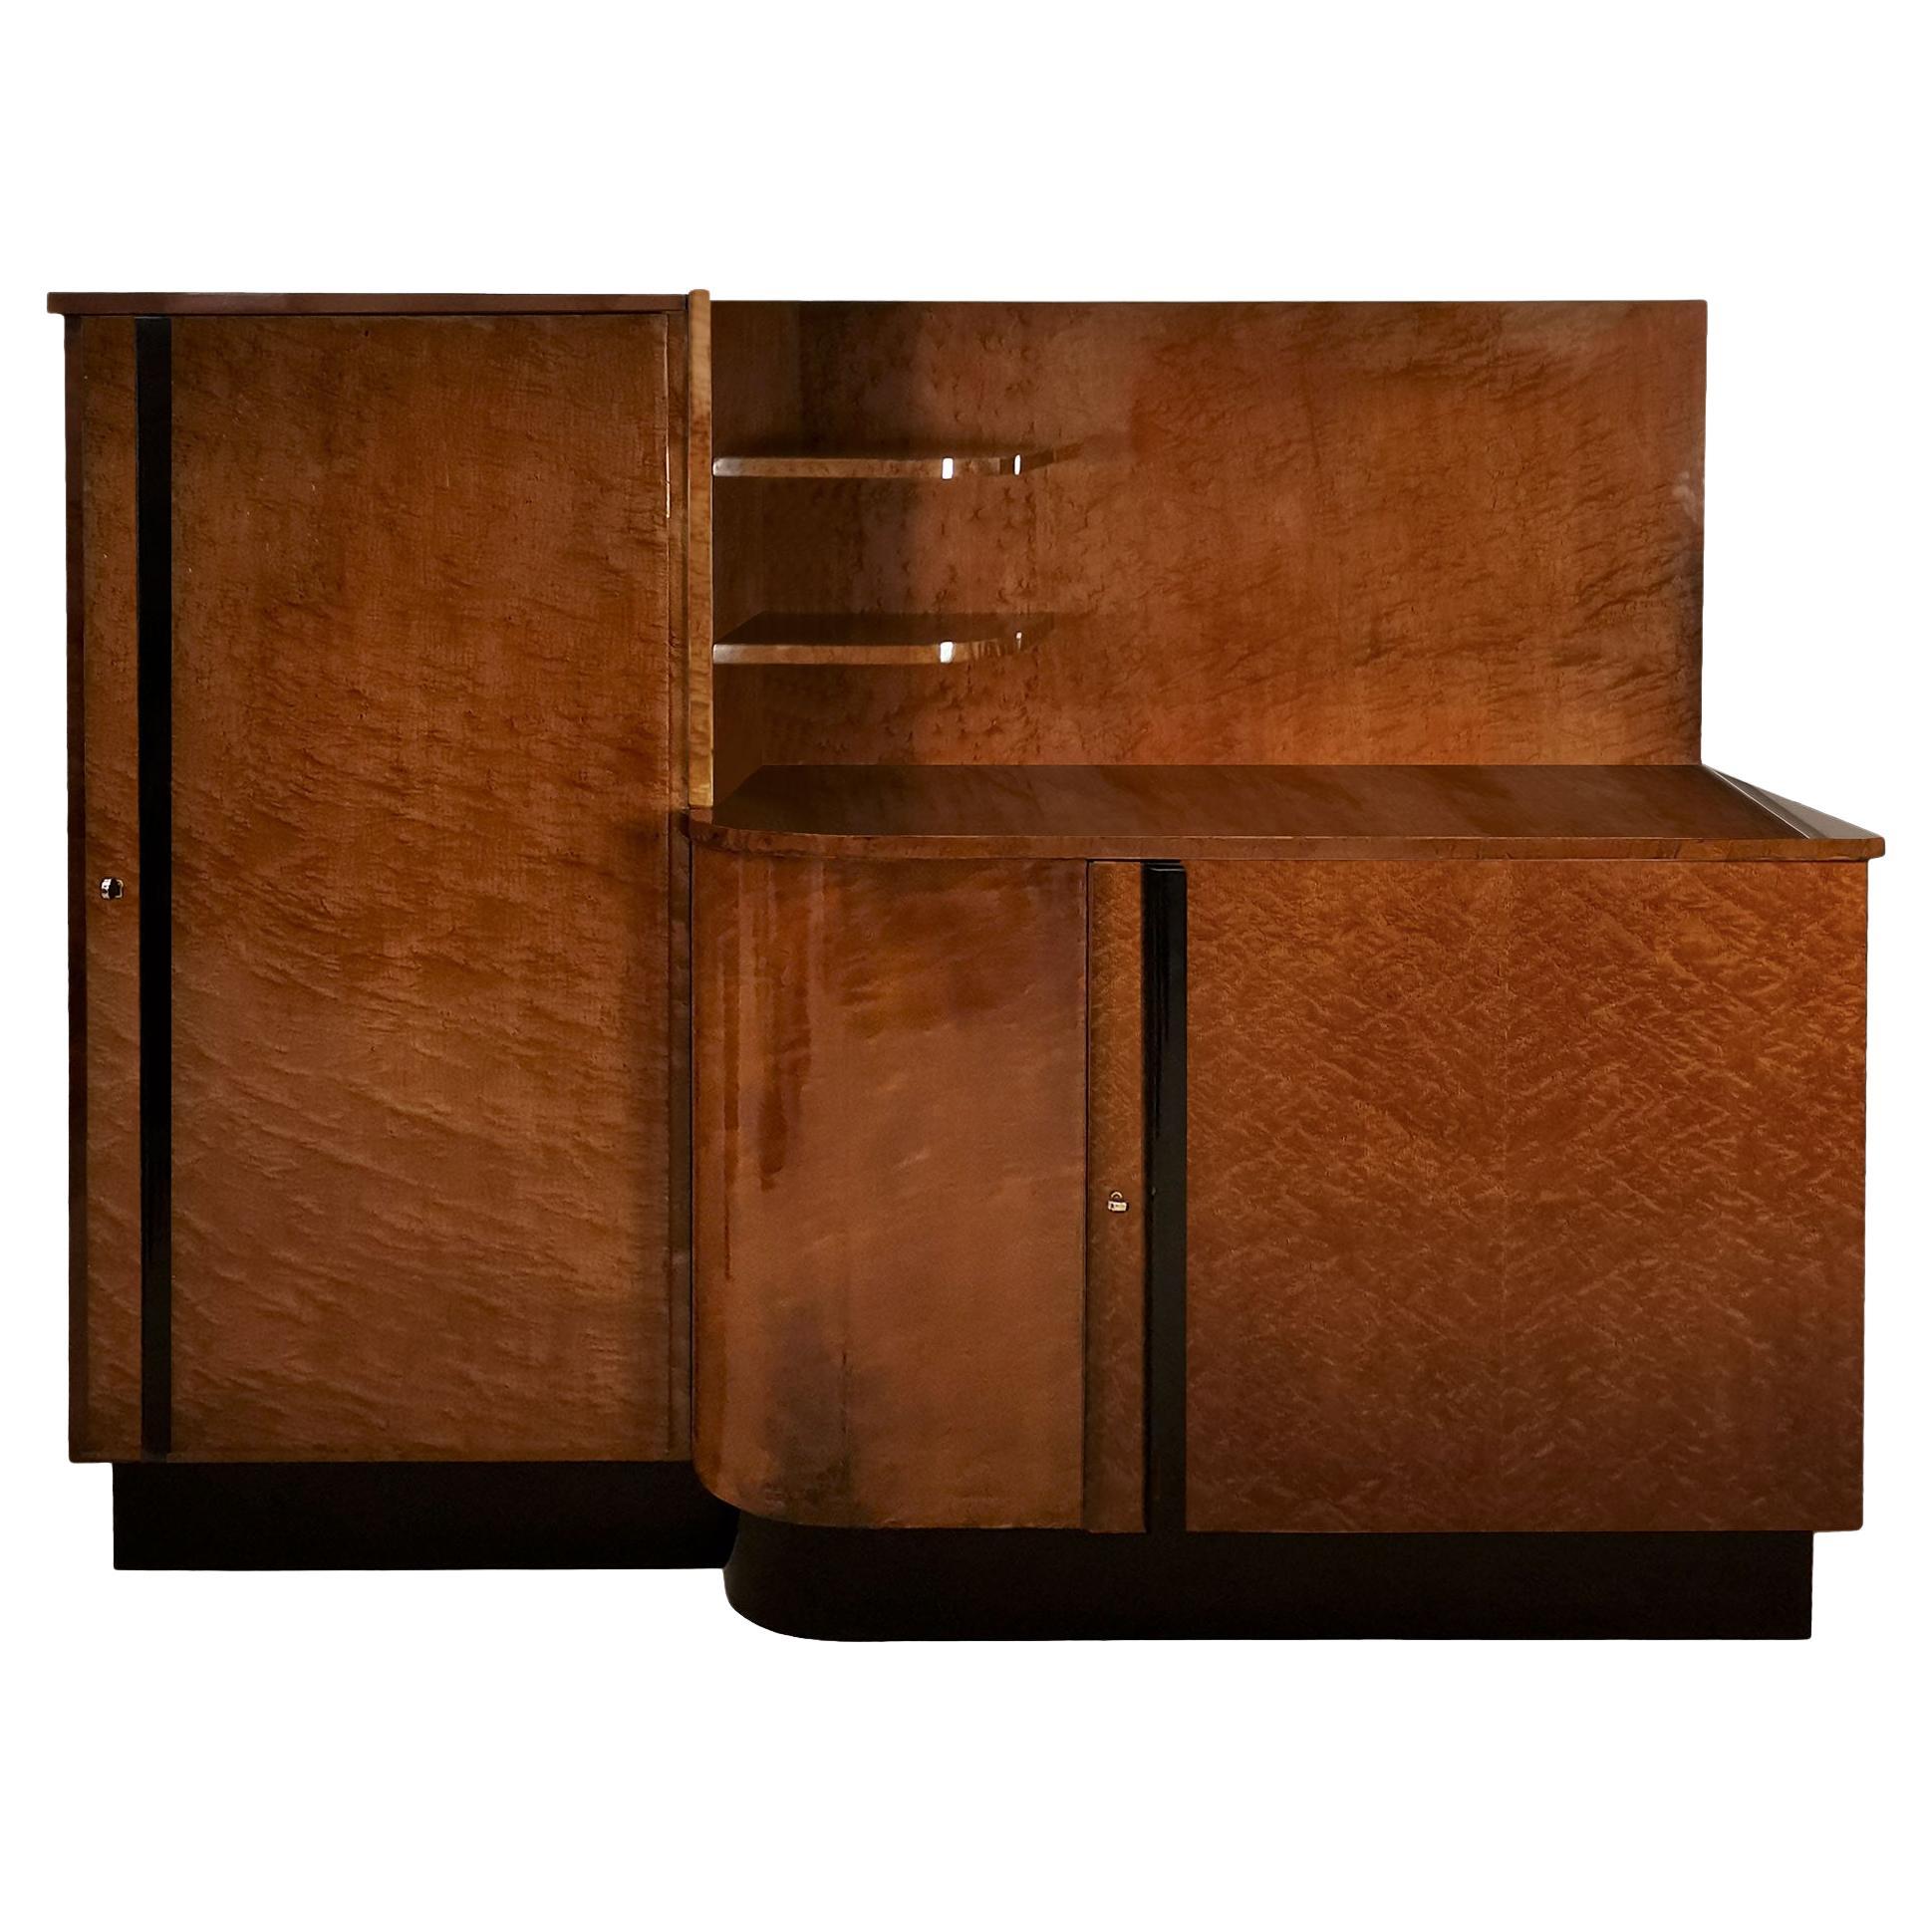 Large Art Deco Sideboard Cabinet in Speckled Mahogany - Italy 1930 For Sale